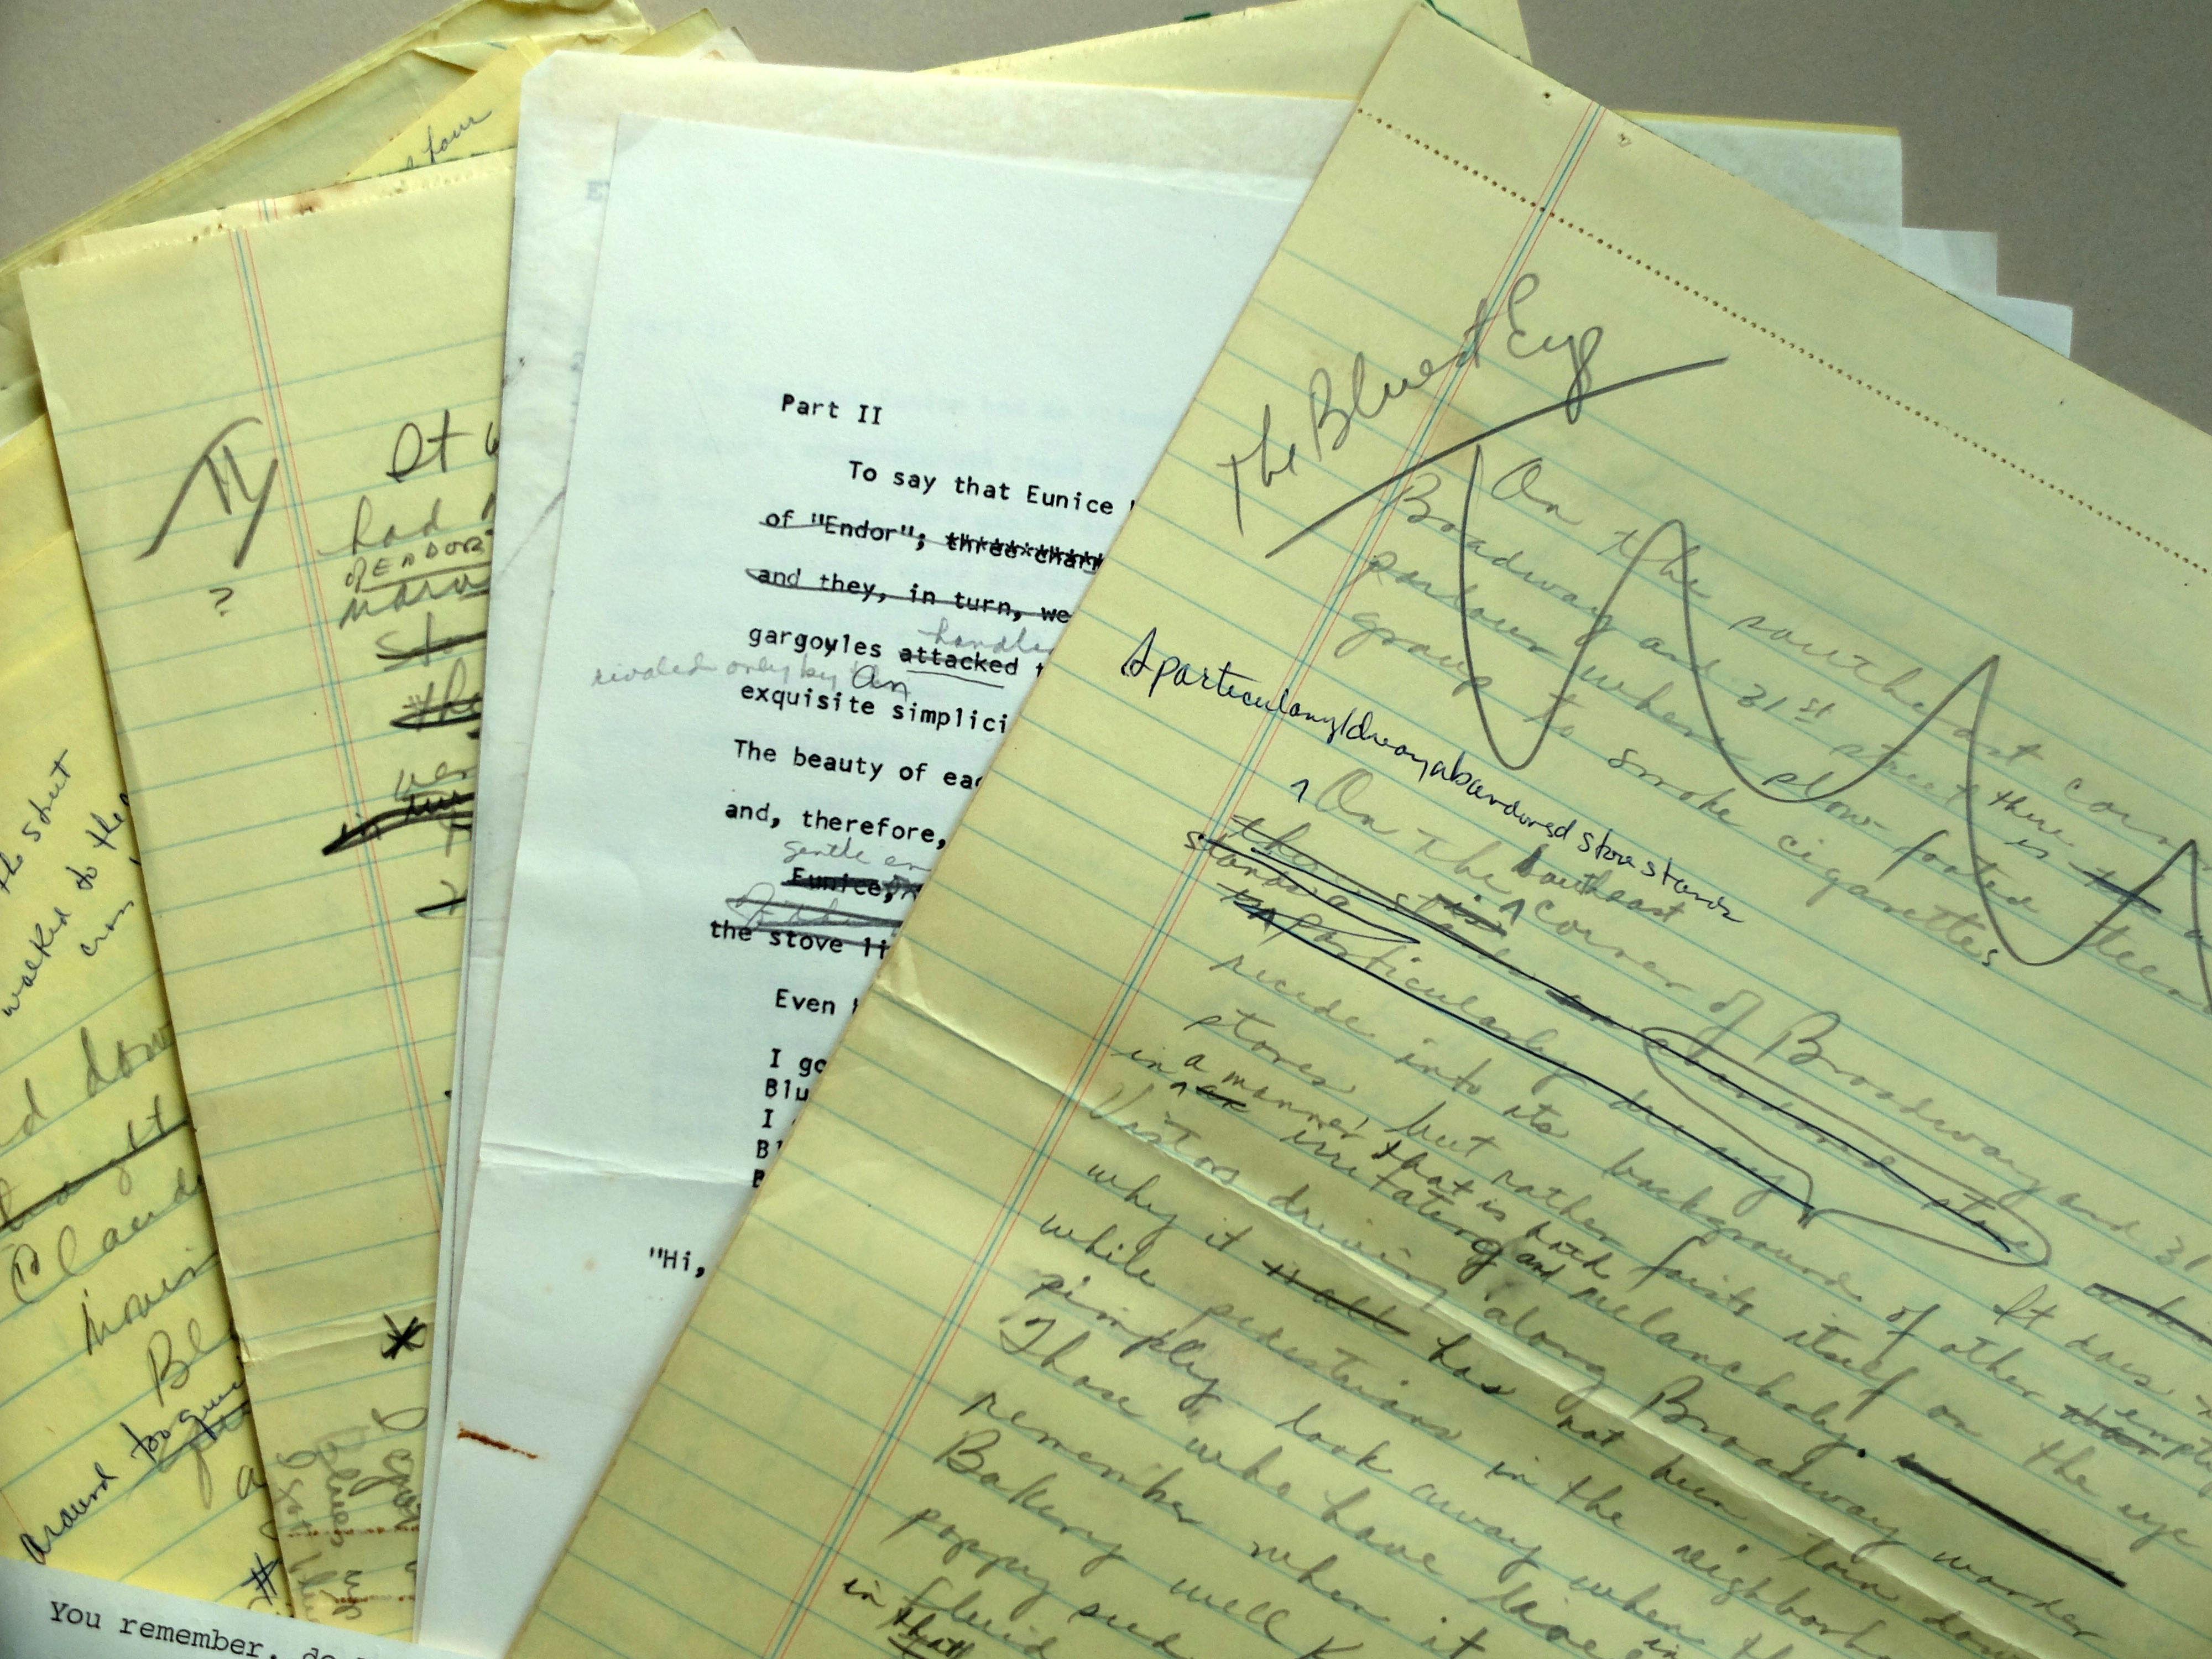 Handwritten draft of “The Bluest Eye” (1970) on yellow legal paper and other early manuscript drafts